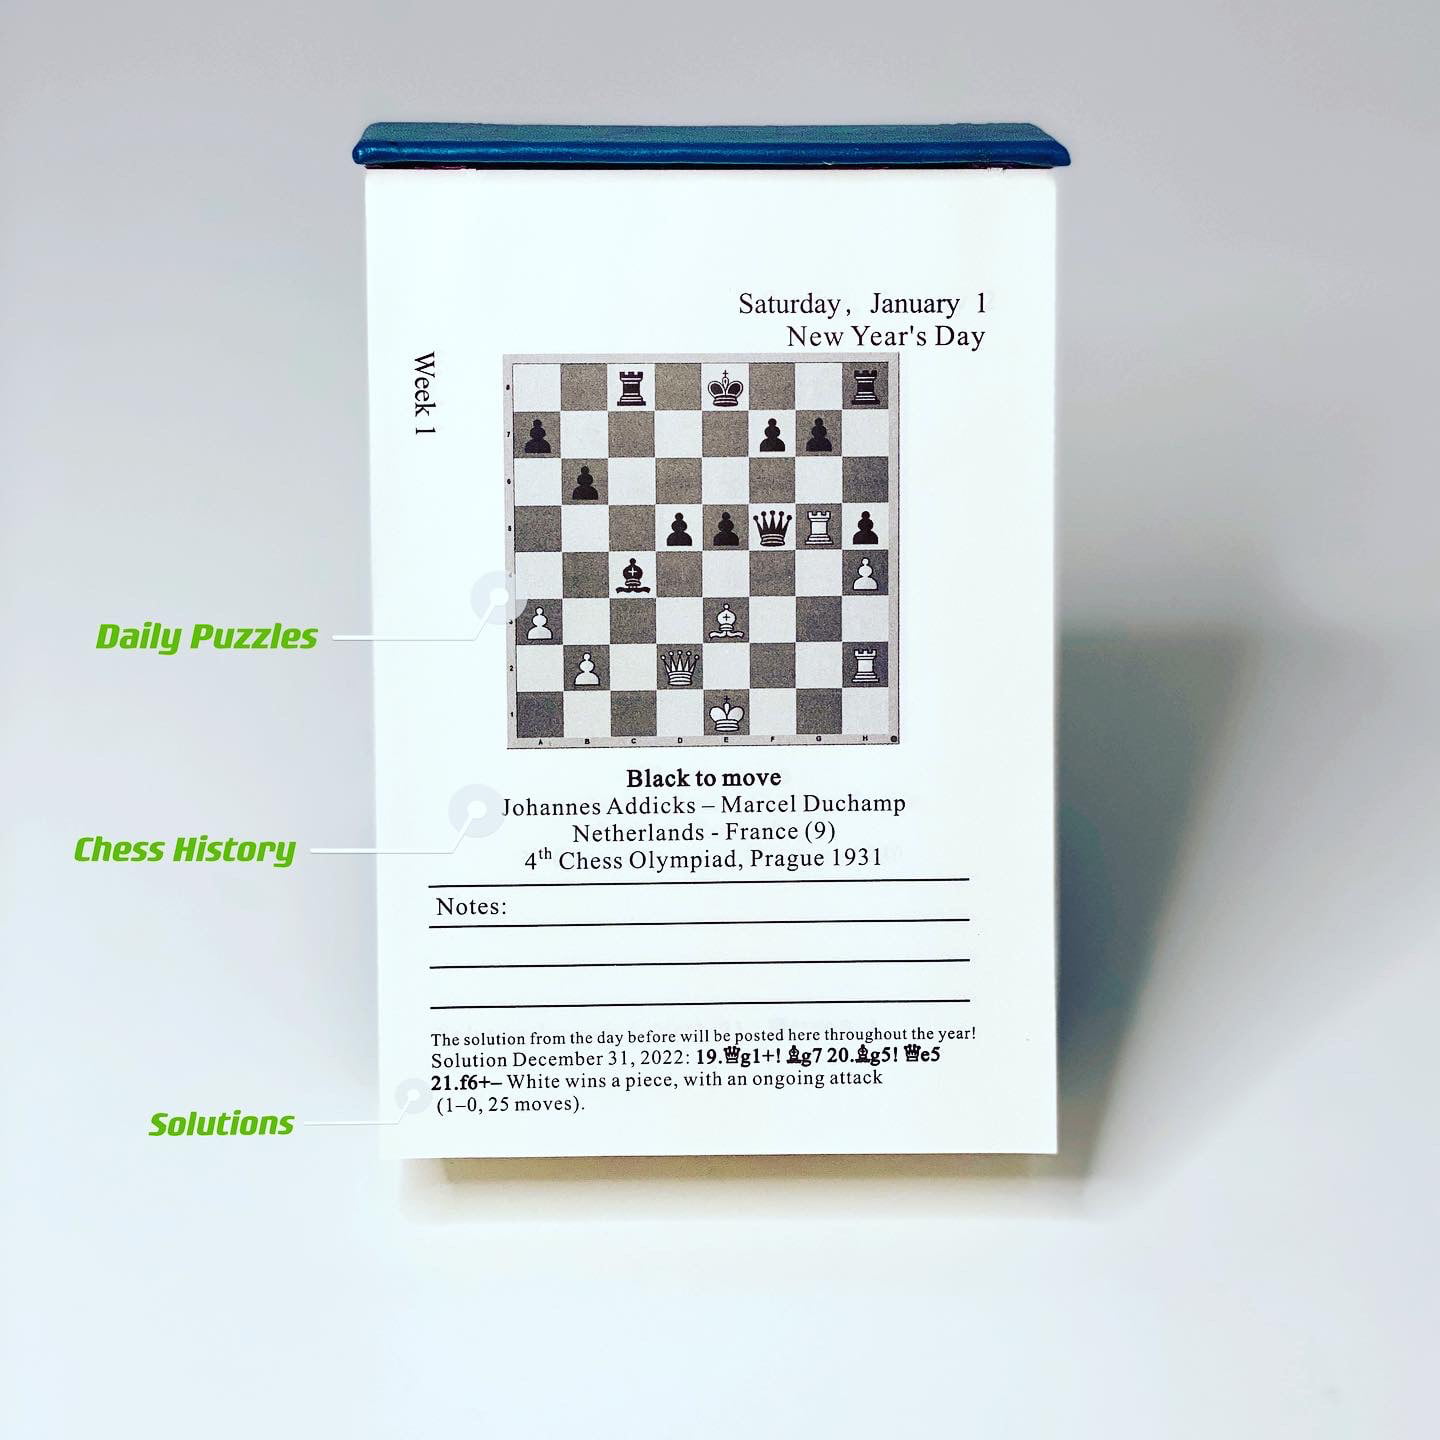 2022 Chess Calendar with Daily Puzzles Designed by IM Silas Esben